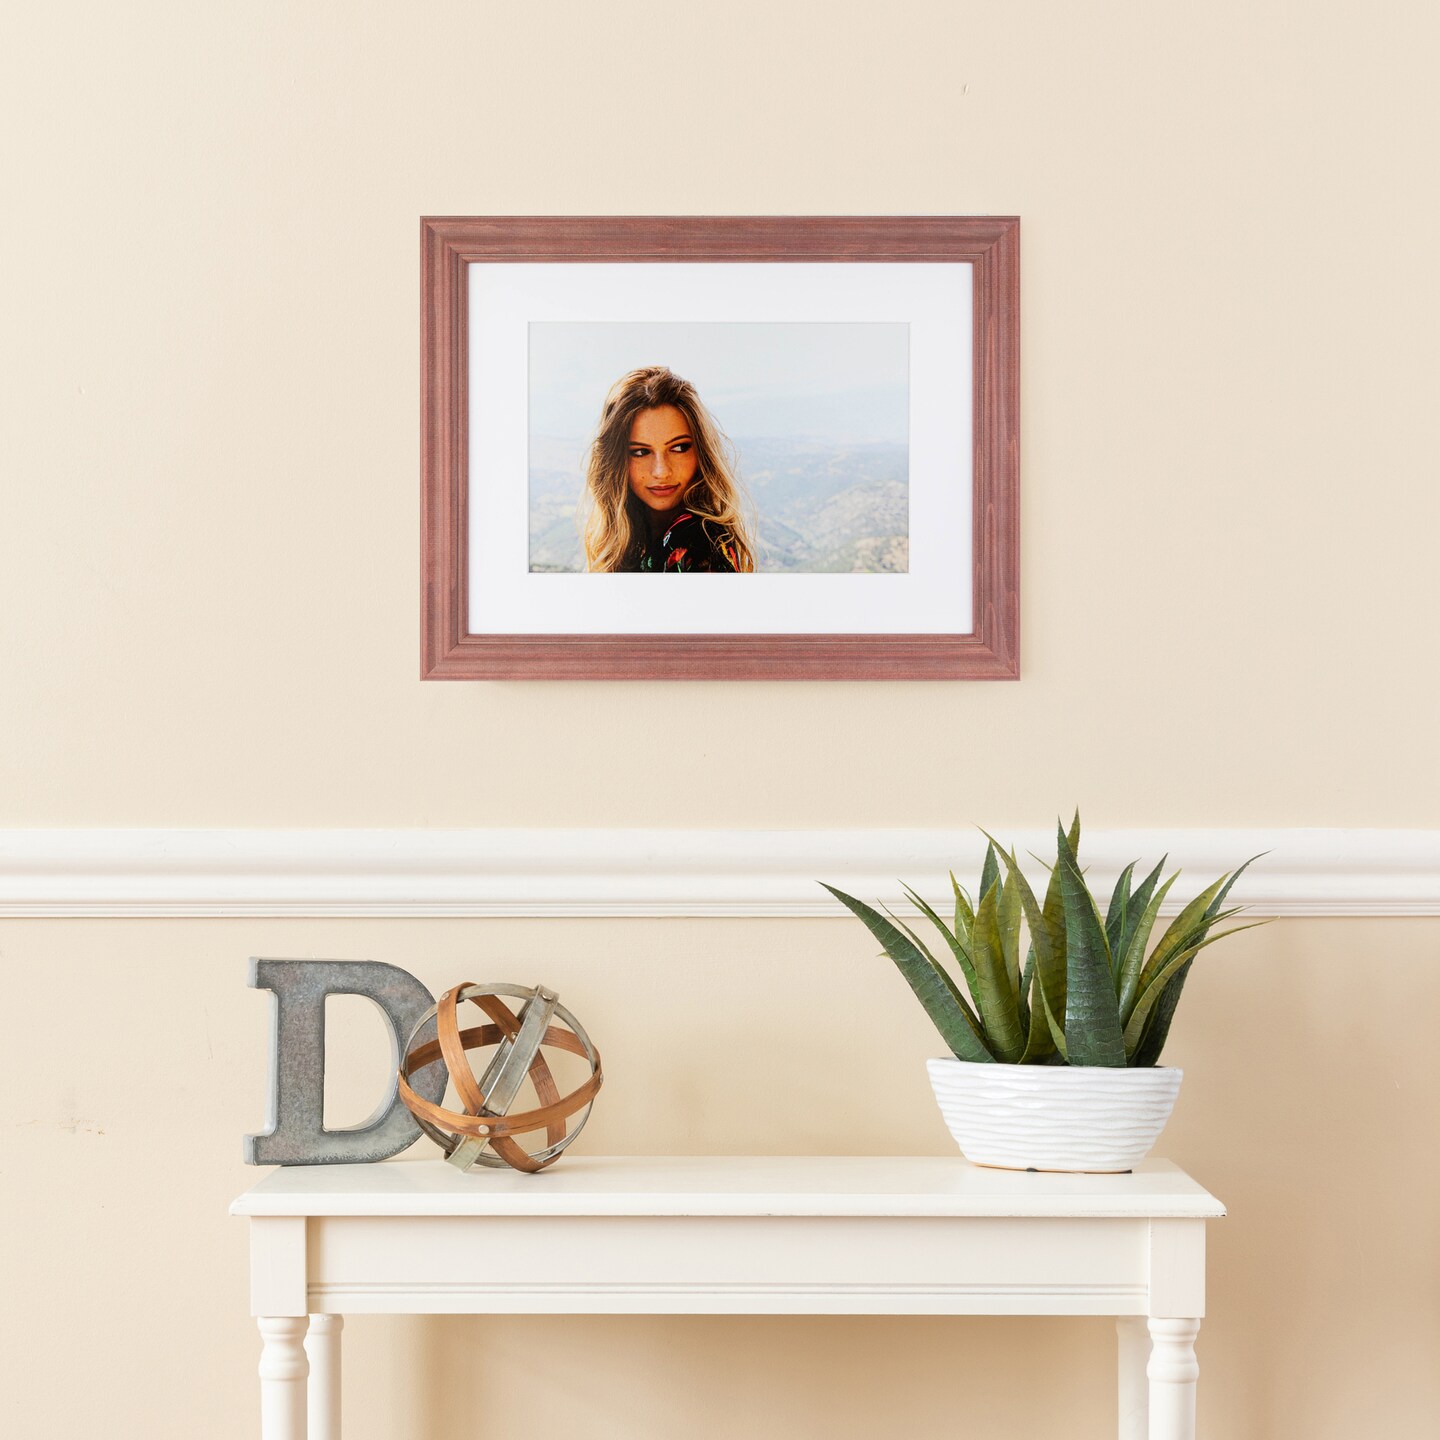 ArtToFrames 16x24 Inch Picture Frame, This 1.50 Inch Custom Wood Poster  Frame is Available in Multiple Colors, Great for Your Art or Photos - Comes  with Regular Acrylic and Foam Backing 3/16